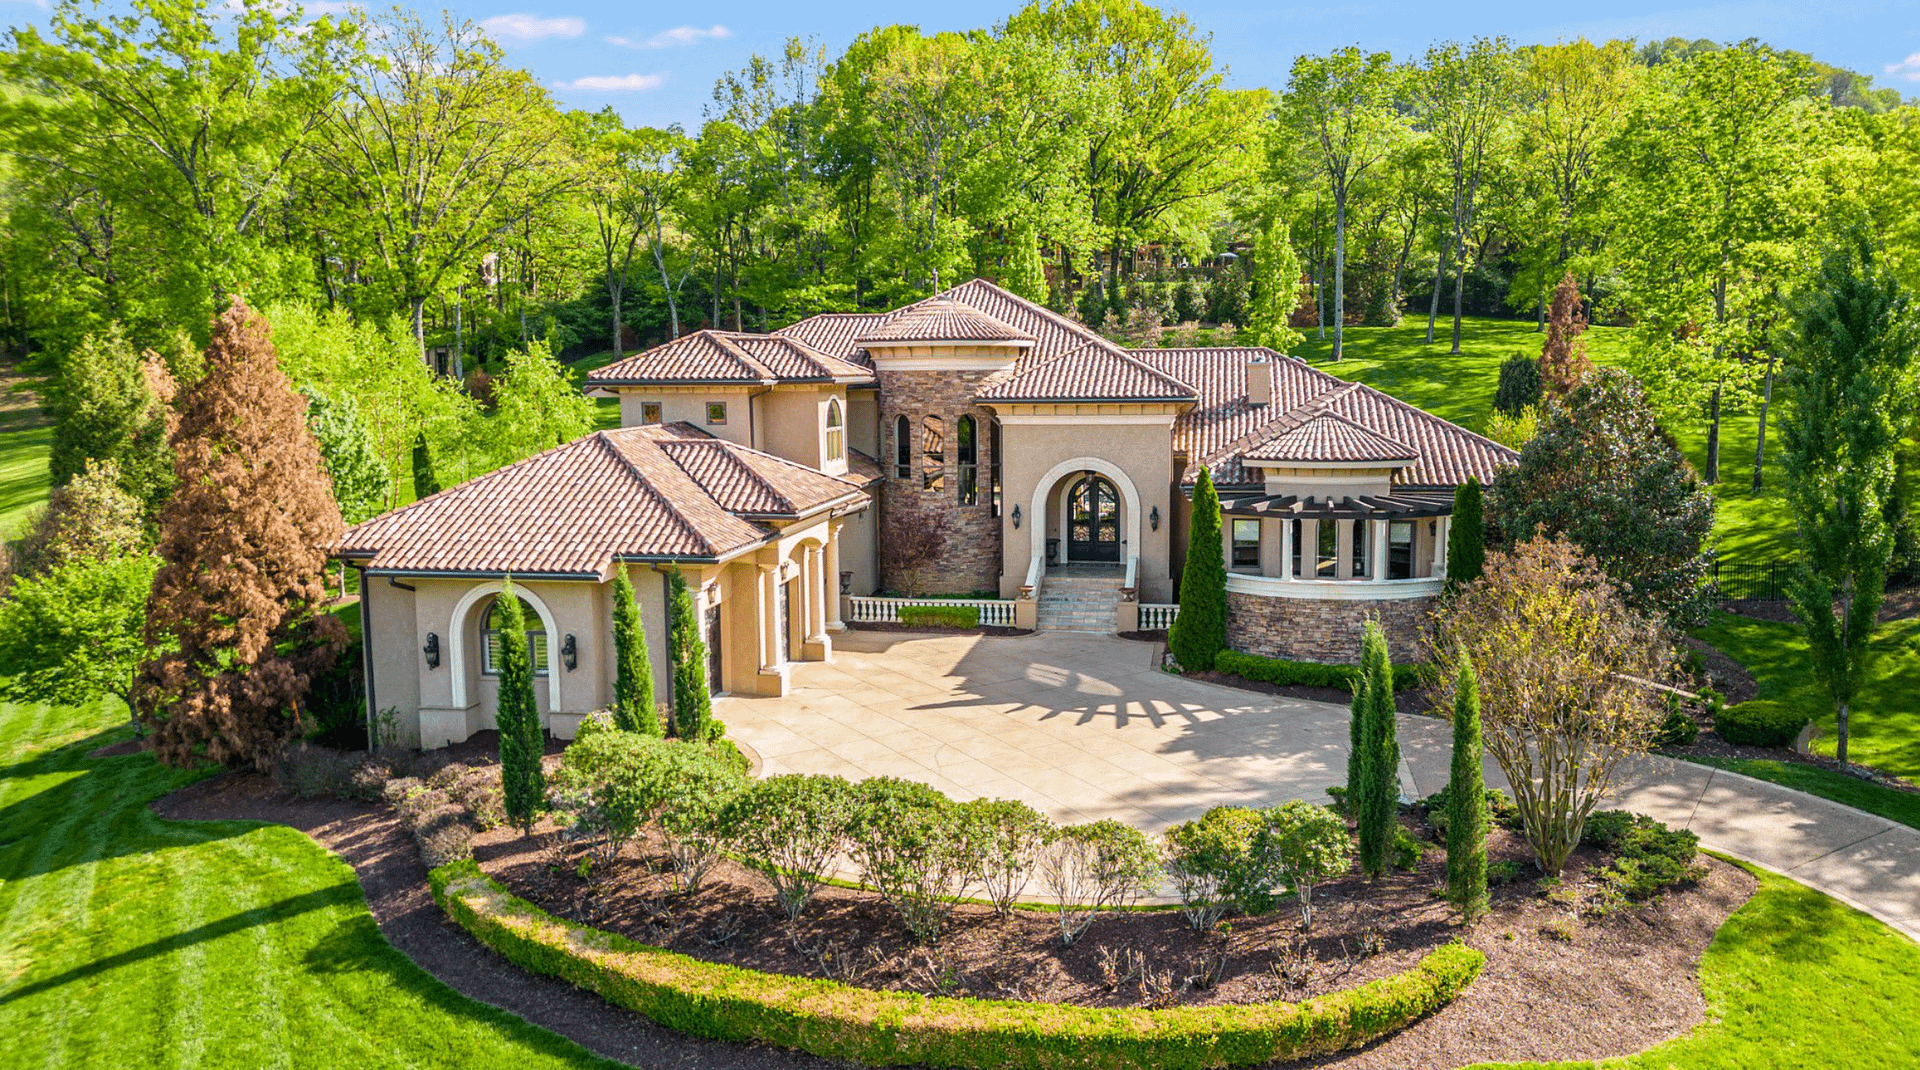 Stone & Stucco Home In Nashville, Tennessee (PHOTOS)